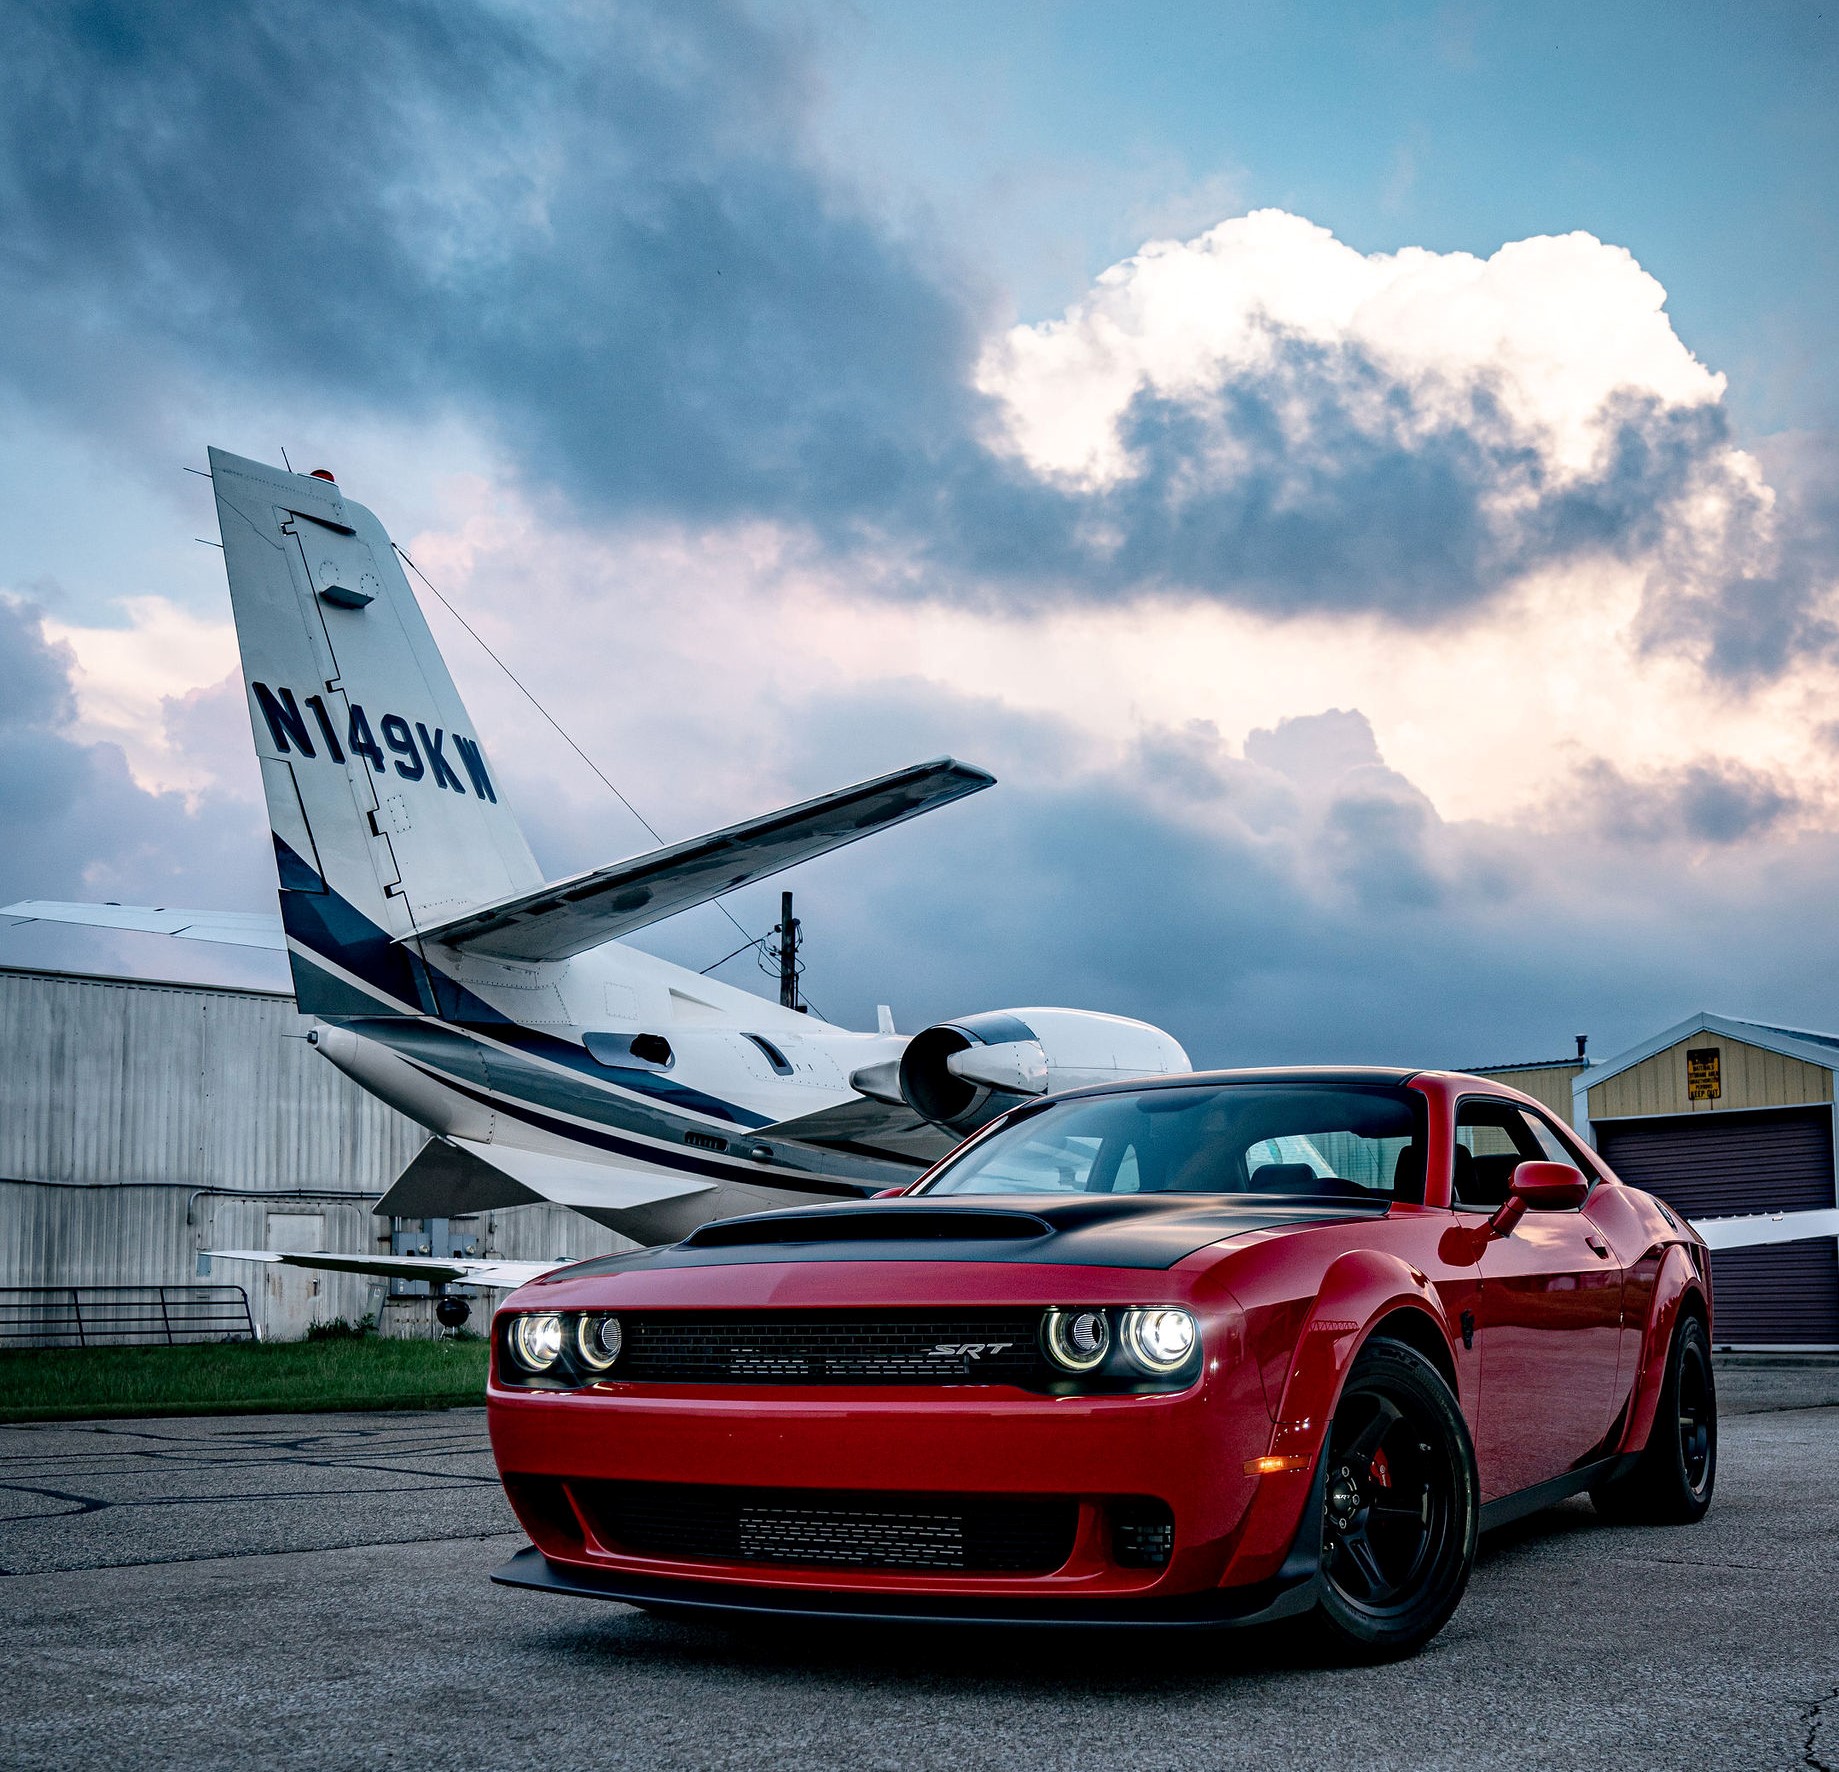 At the recent event,  "Fast Cars and Faster Jets," at Kalamazoo-based RAI Jets, the displays extended outside the RAI Jets hangar.